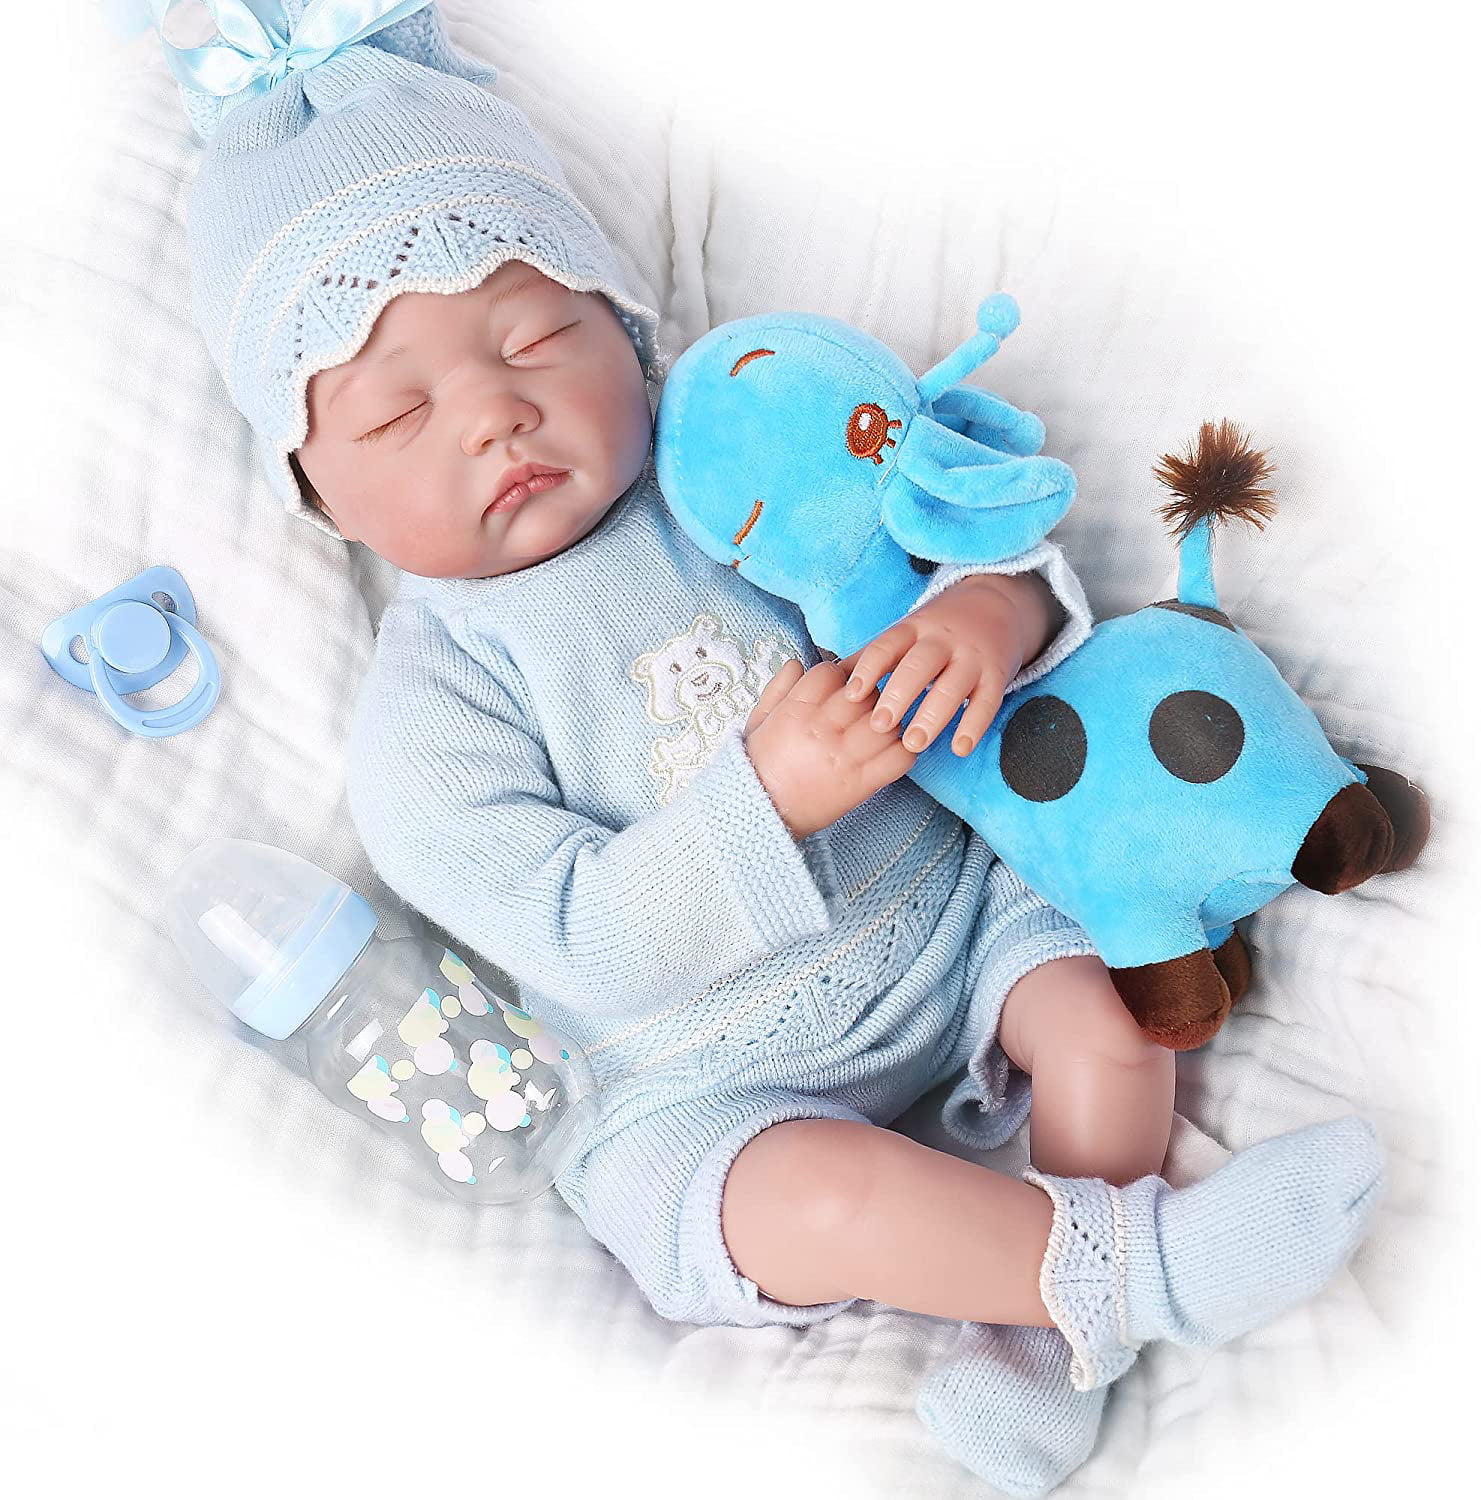 28" Reborn Toddler Silicone Toy Bearreborn Baby Boy With Short Hair Dolls Gifts 